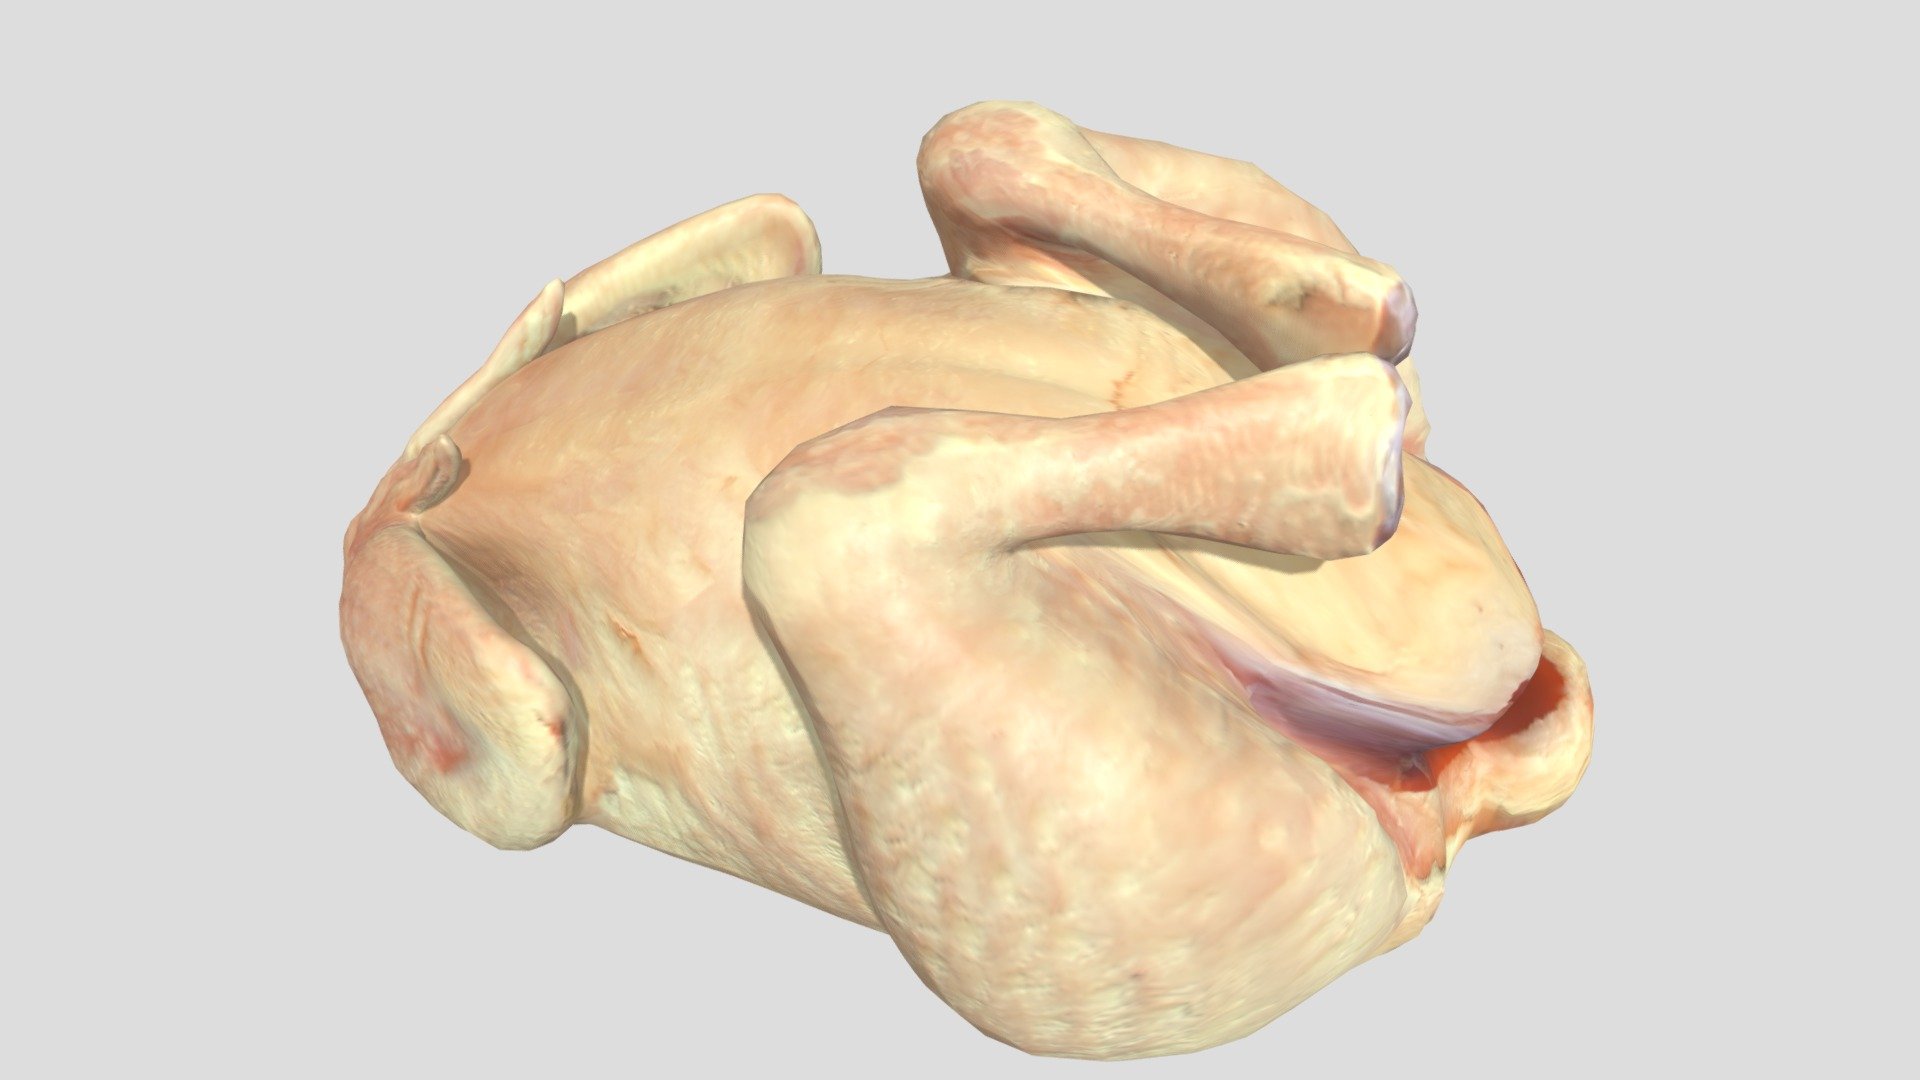 3d model of a TURKEY. Perfect for games, scenes or renders.

Model is correctly divided into main parts. All main parts are presented as separate parts therefore materials of objects are easy to be modified or removed and standard parts are easy to be replaced.

TEXTURES: Models includes high textures with maps: Base Color (.png) Height (.png) Metallic (.png) Normal (.png) Roughness (.png)

FORMATS: .obj .dae .stl .blend .fbx .3ds

GENERAL: Easy editable. Model is fully textured.

Vertices: 10,1 KPolygons: 10,1 K

All formats have been tested and work correctly.

Some files may need textures or materials adjusted or added depending on the program they are imported into 3d model